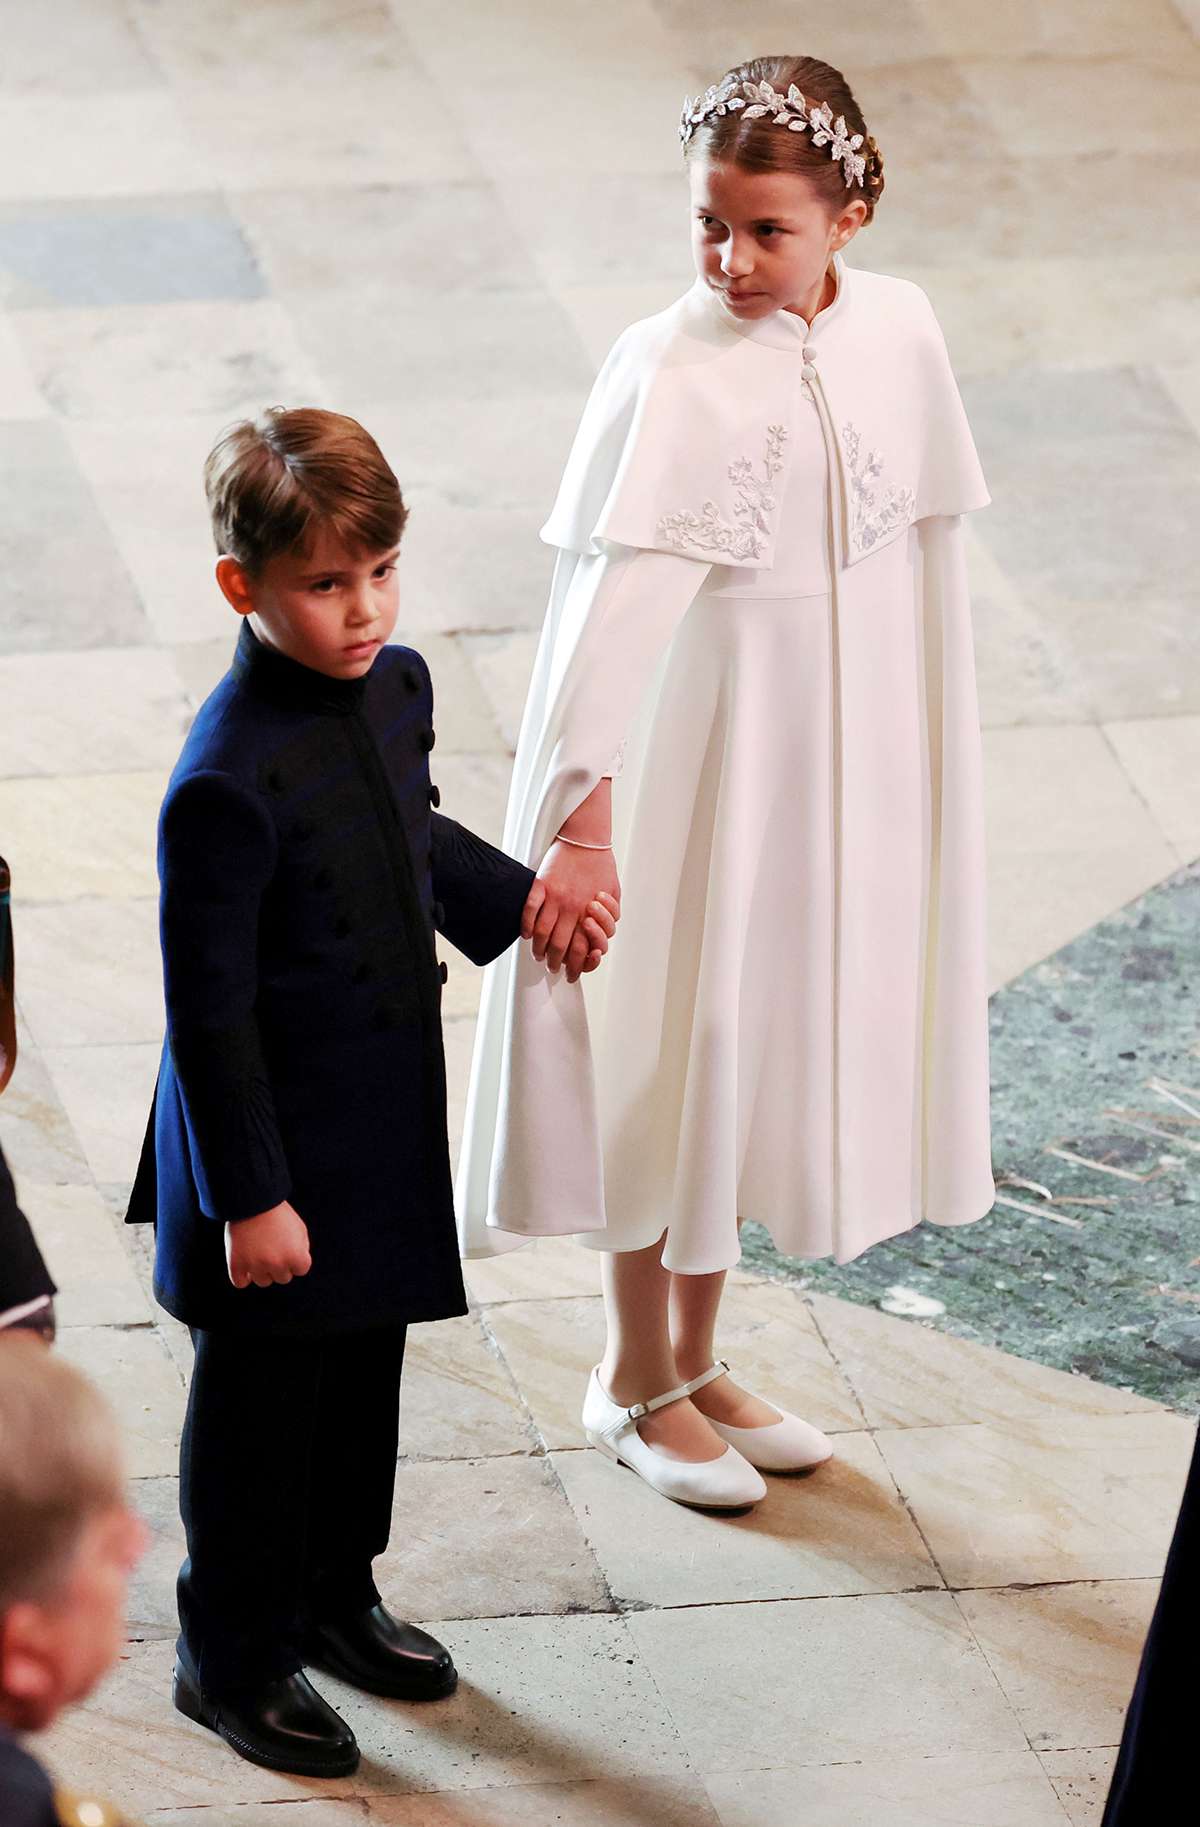 People Joke That Prince Louis And Princess Charlotte Have Come In Star Wars Cosplay To King's Coronation